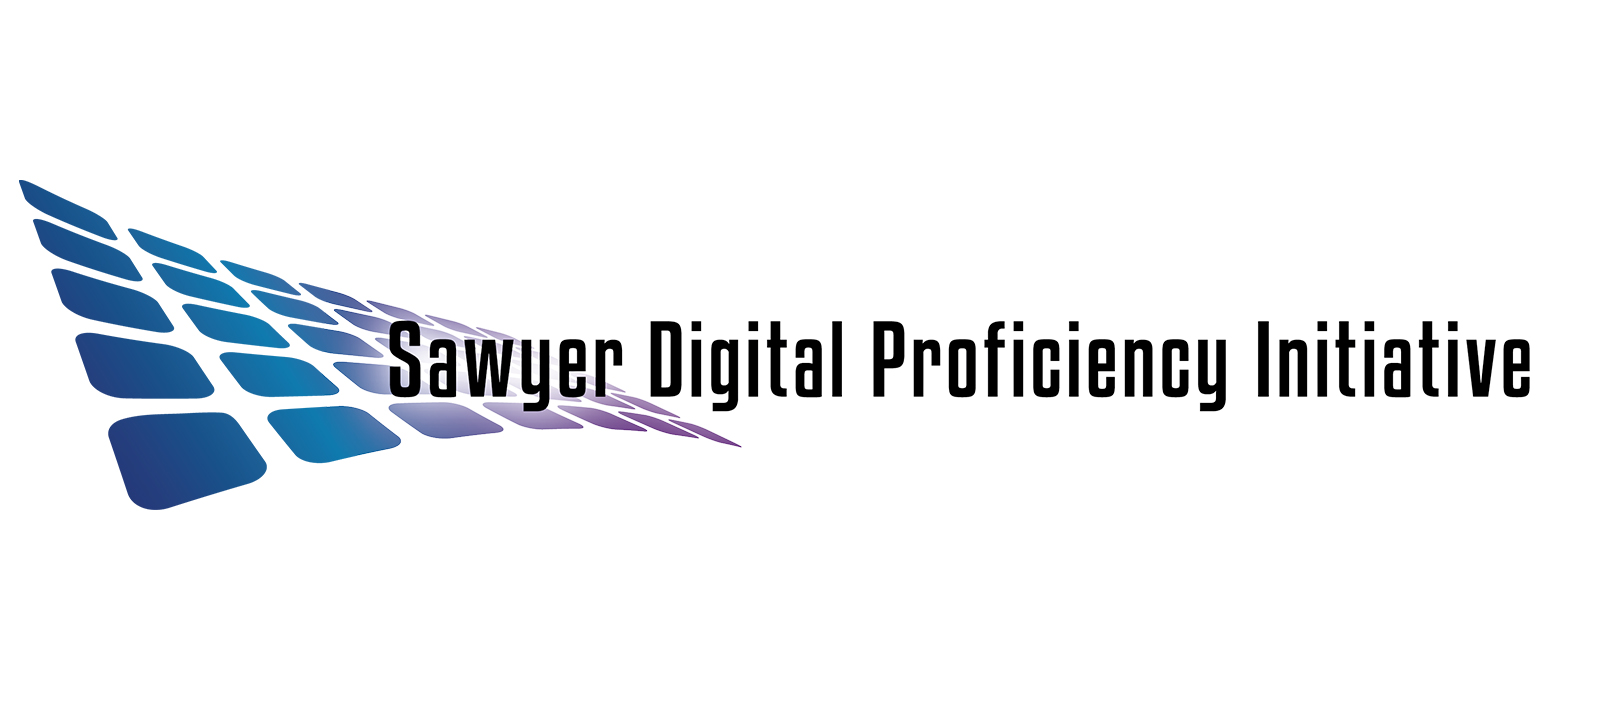 Digital Proficiency SDPI Logo Alone   For use on white background.png